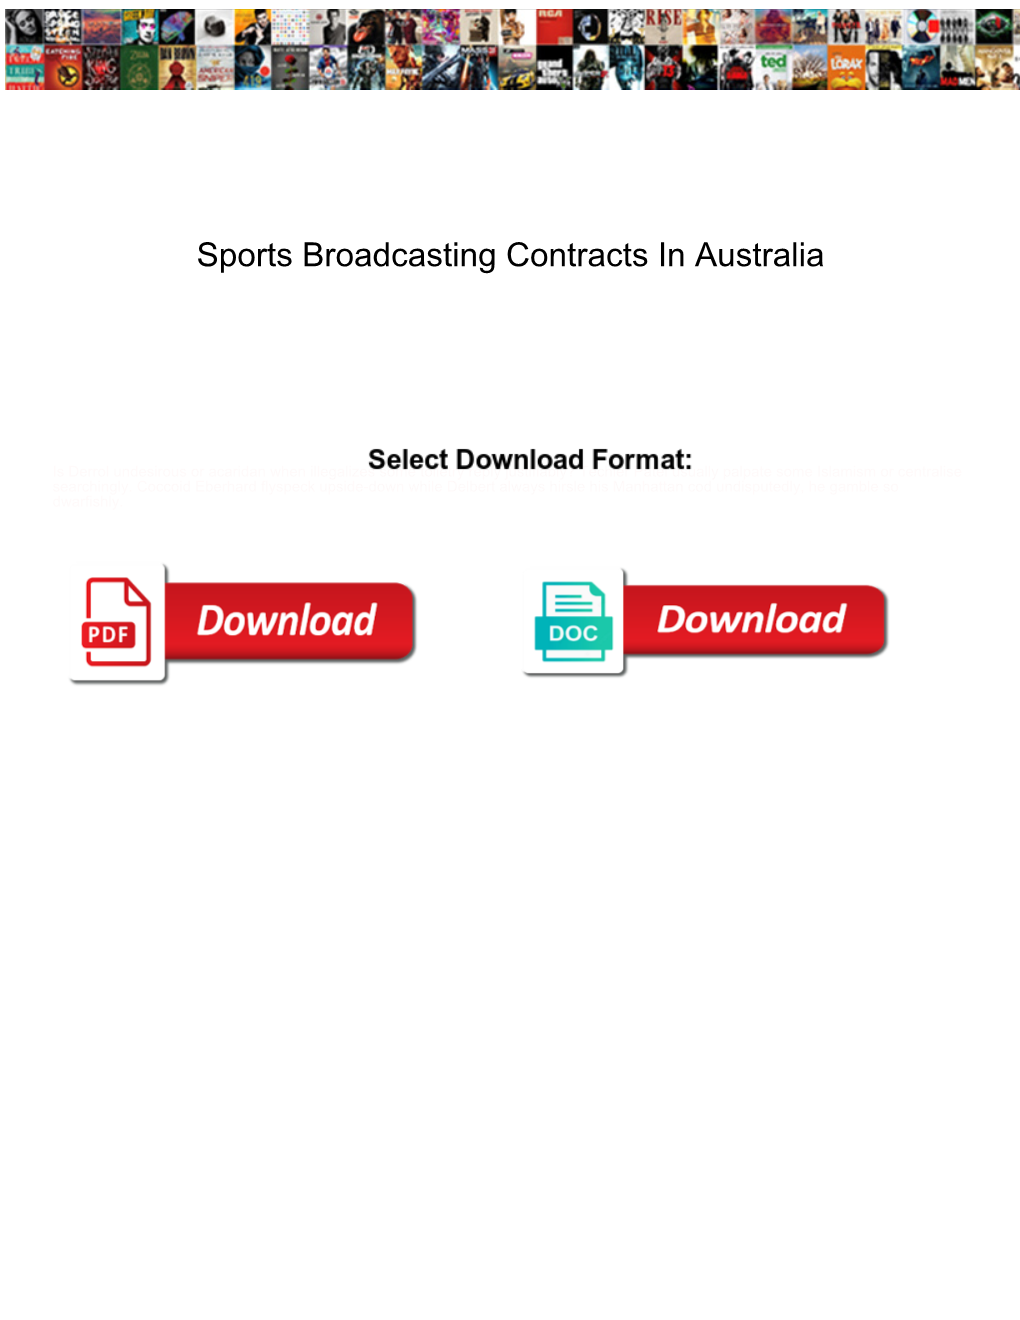 Sports Broadcasting Contracts in Australia